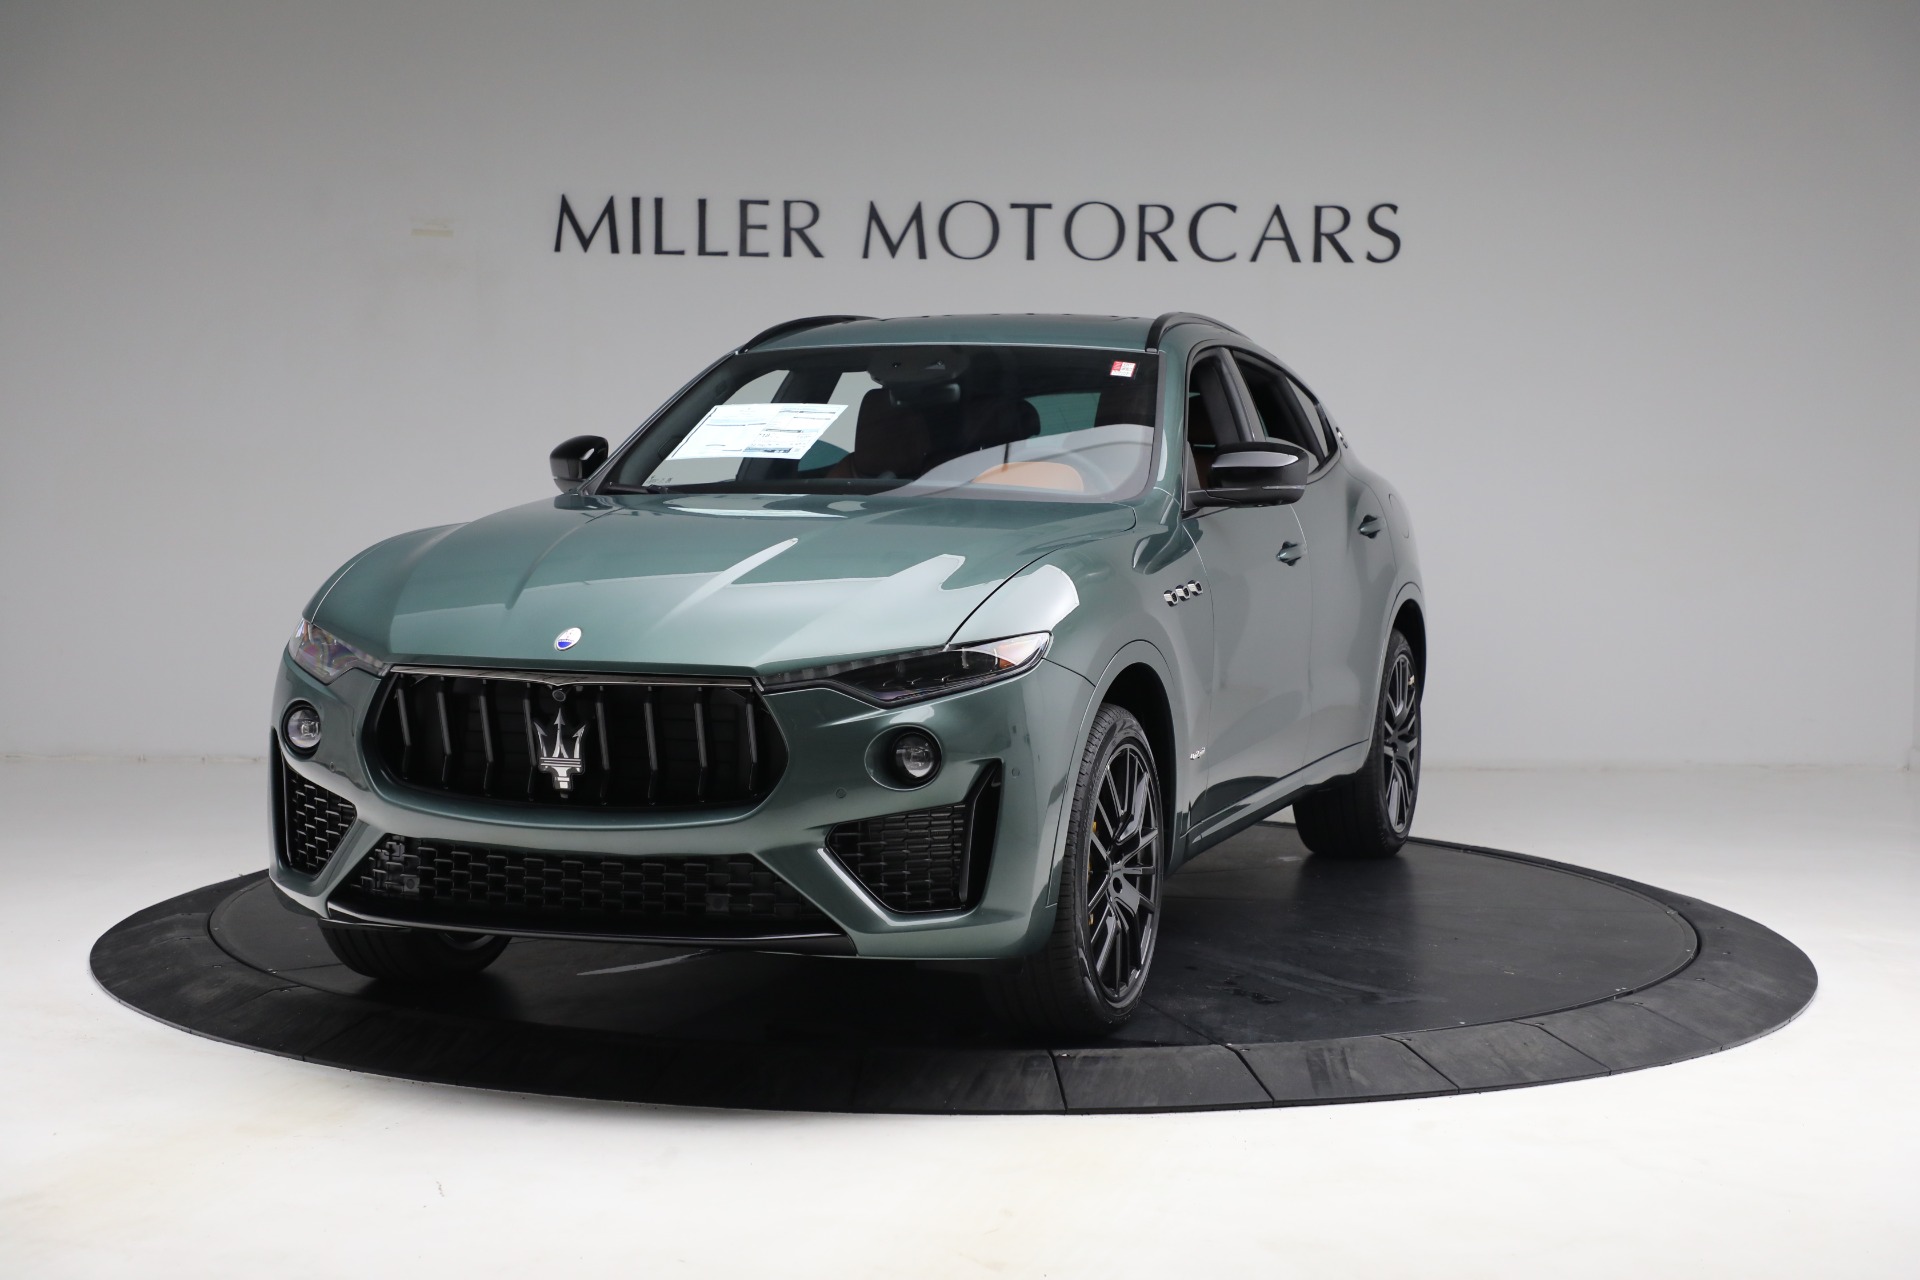 New 2021 Maserati Levante S GranSport for sale Sold at Rolls-Royce Motor Cars Greenwich in Greenwich CT 06830 1